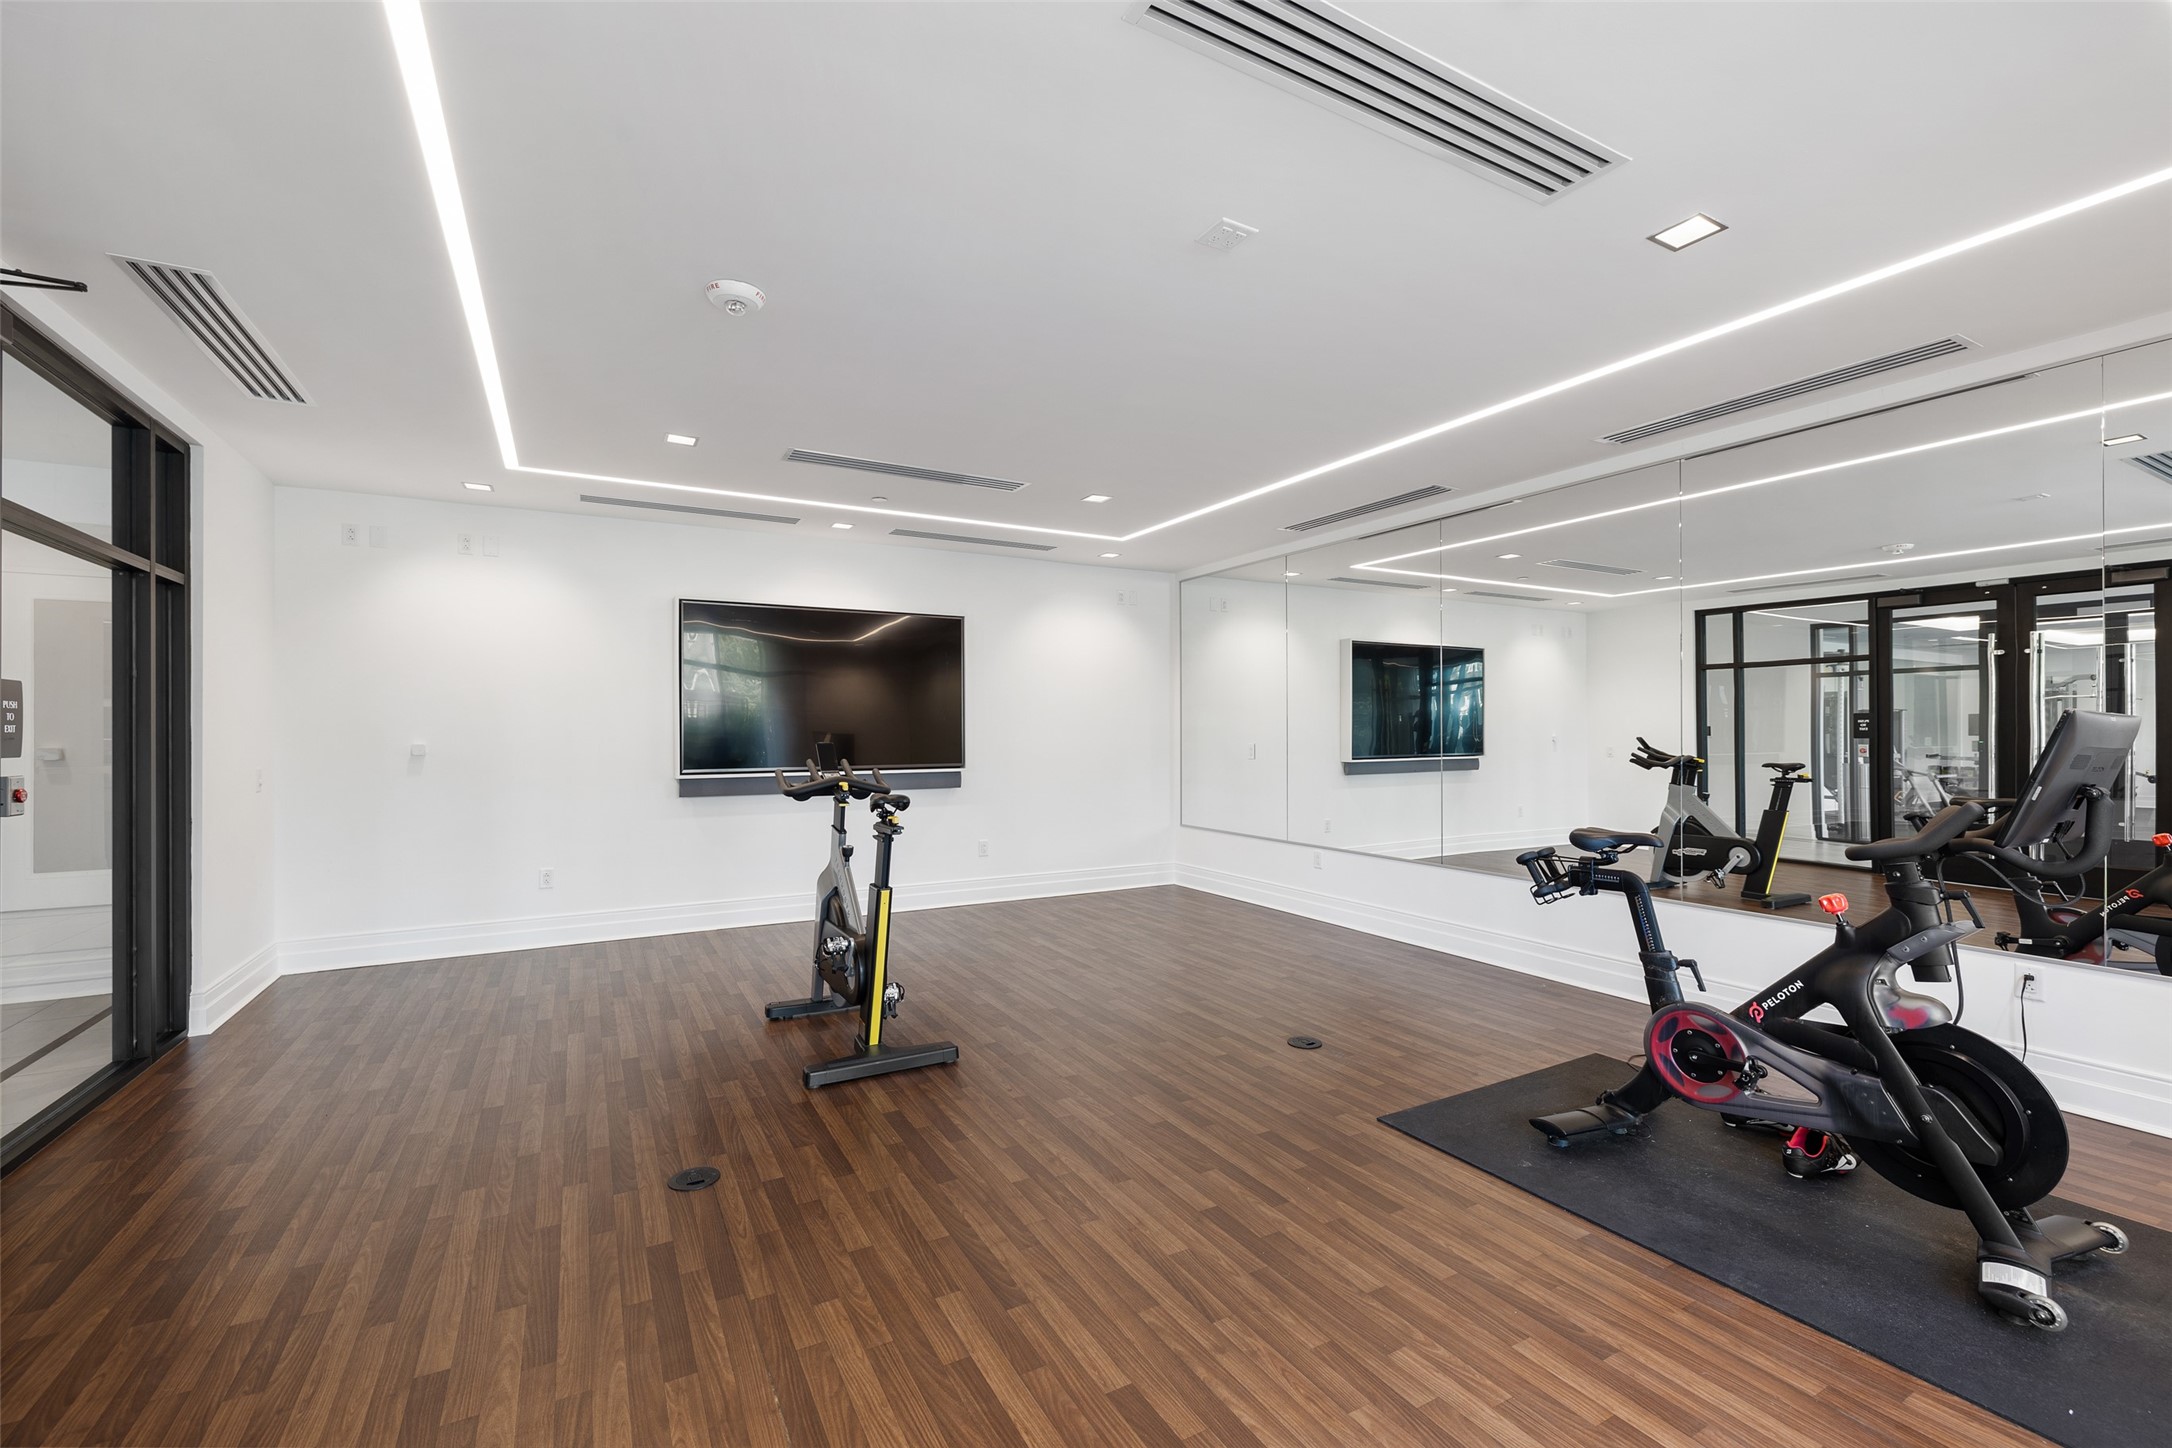 This is a private gym area complete with TV and extra equipment if needed. As a residence you and your personal trainer can work out in this area.